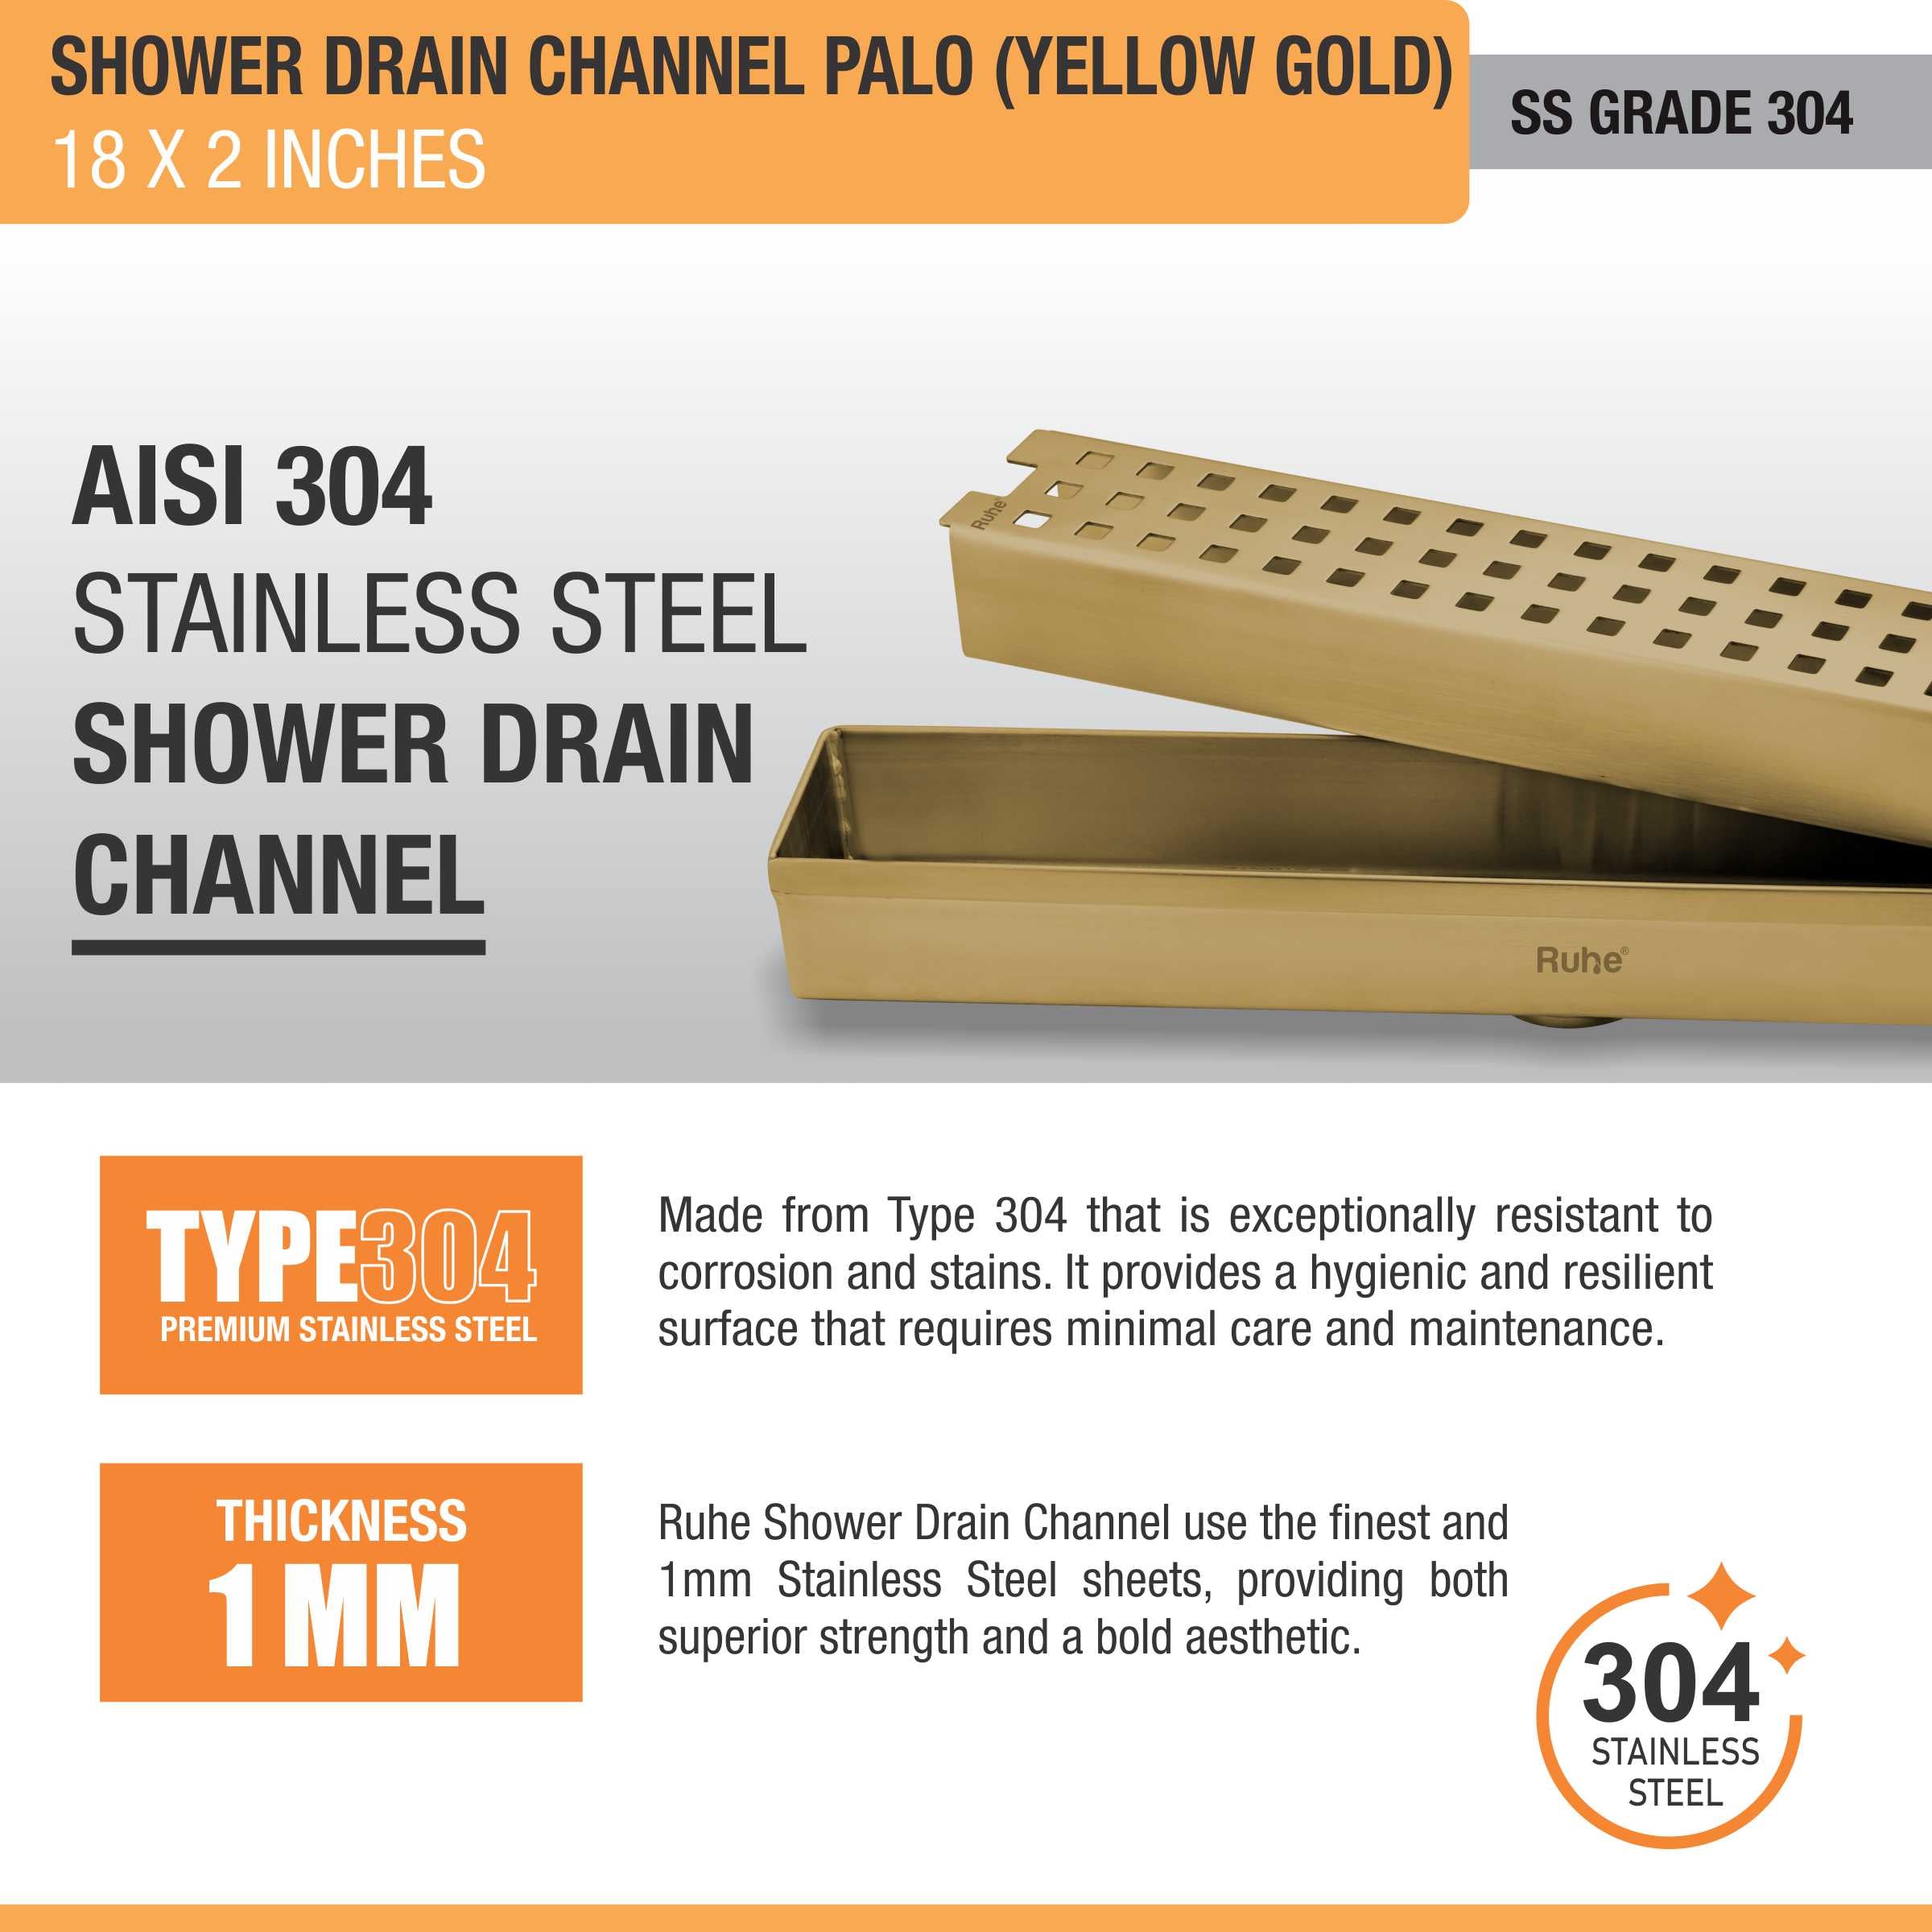 Palo Shower Drain Channel (18 x 2 Inches) YELLOW GOLD stainless steel